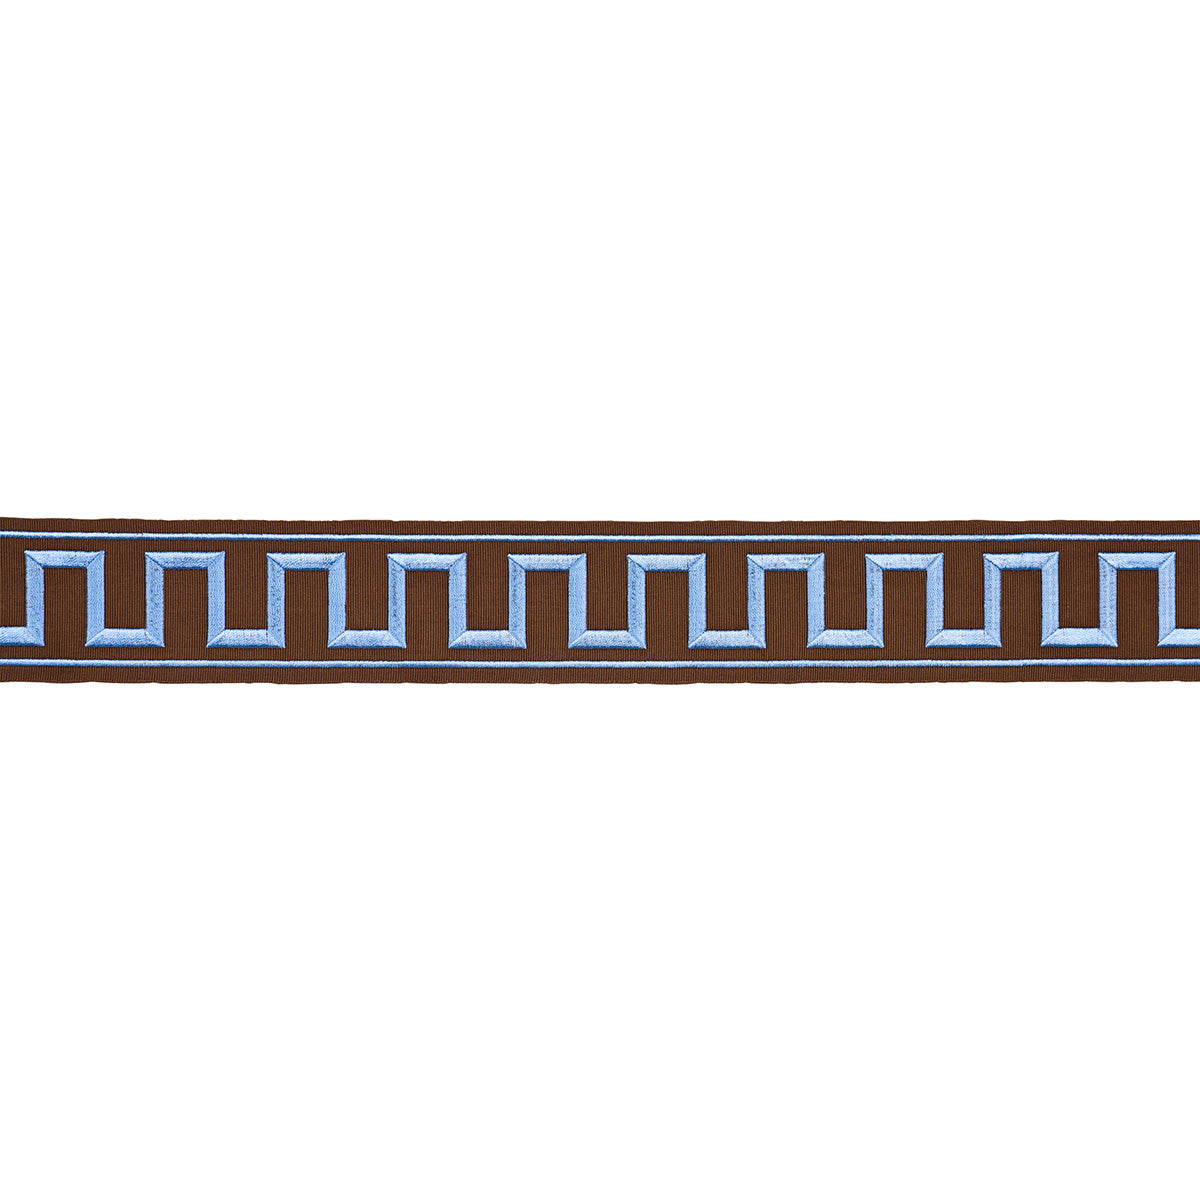 GREEK KEY EMBROIDERED TAPE | BLUE ON BROWN